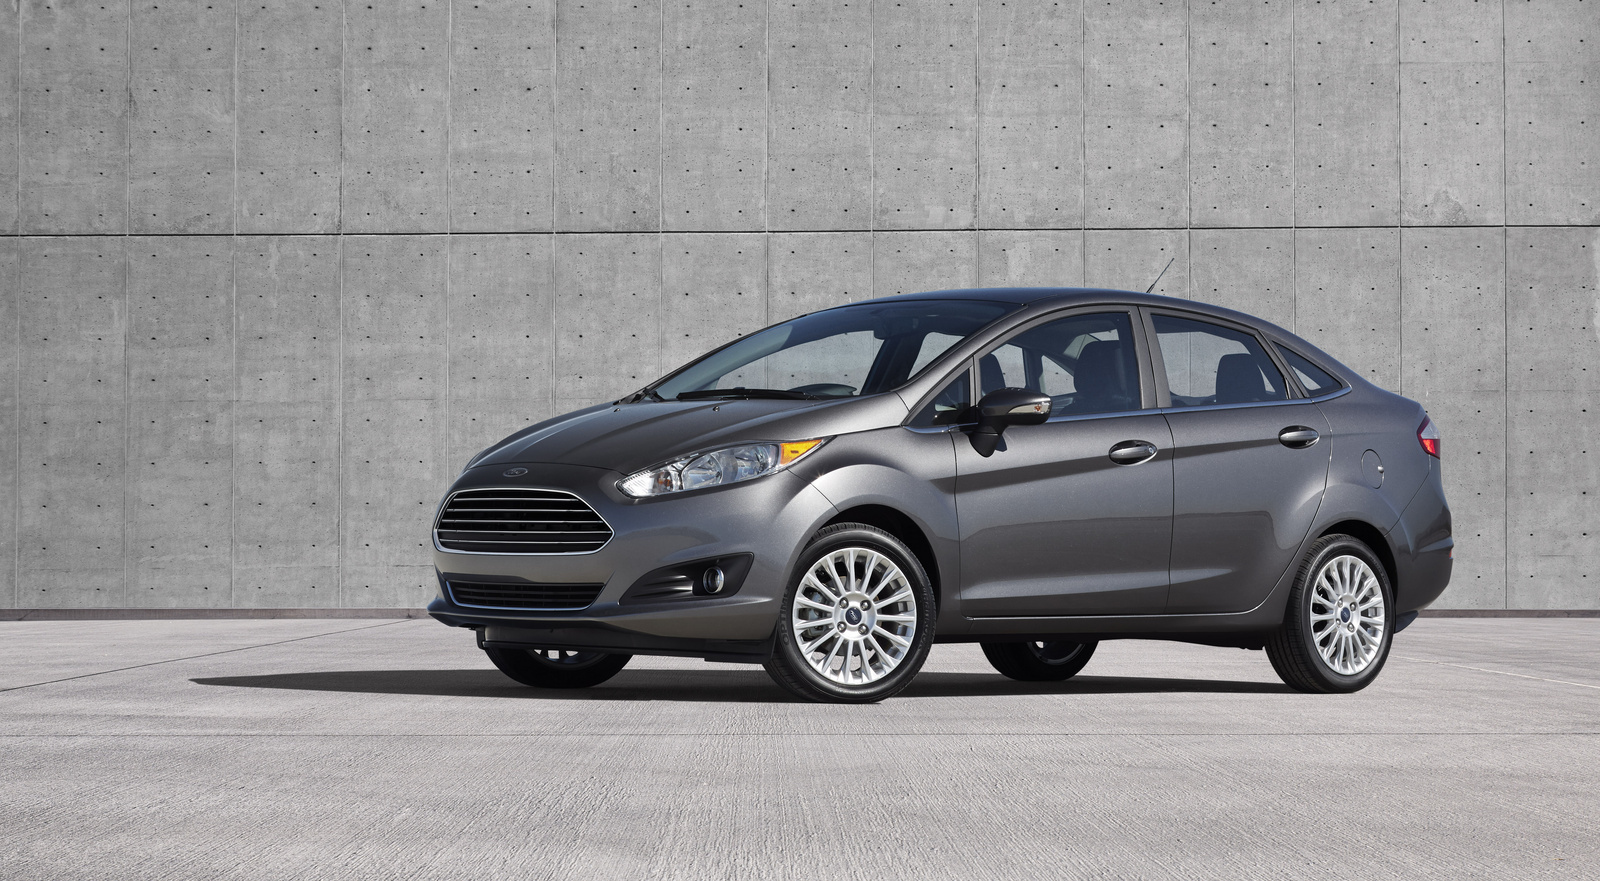 2015 Ford Fiesta Review & Ratings